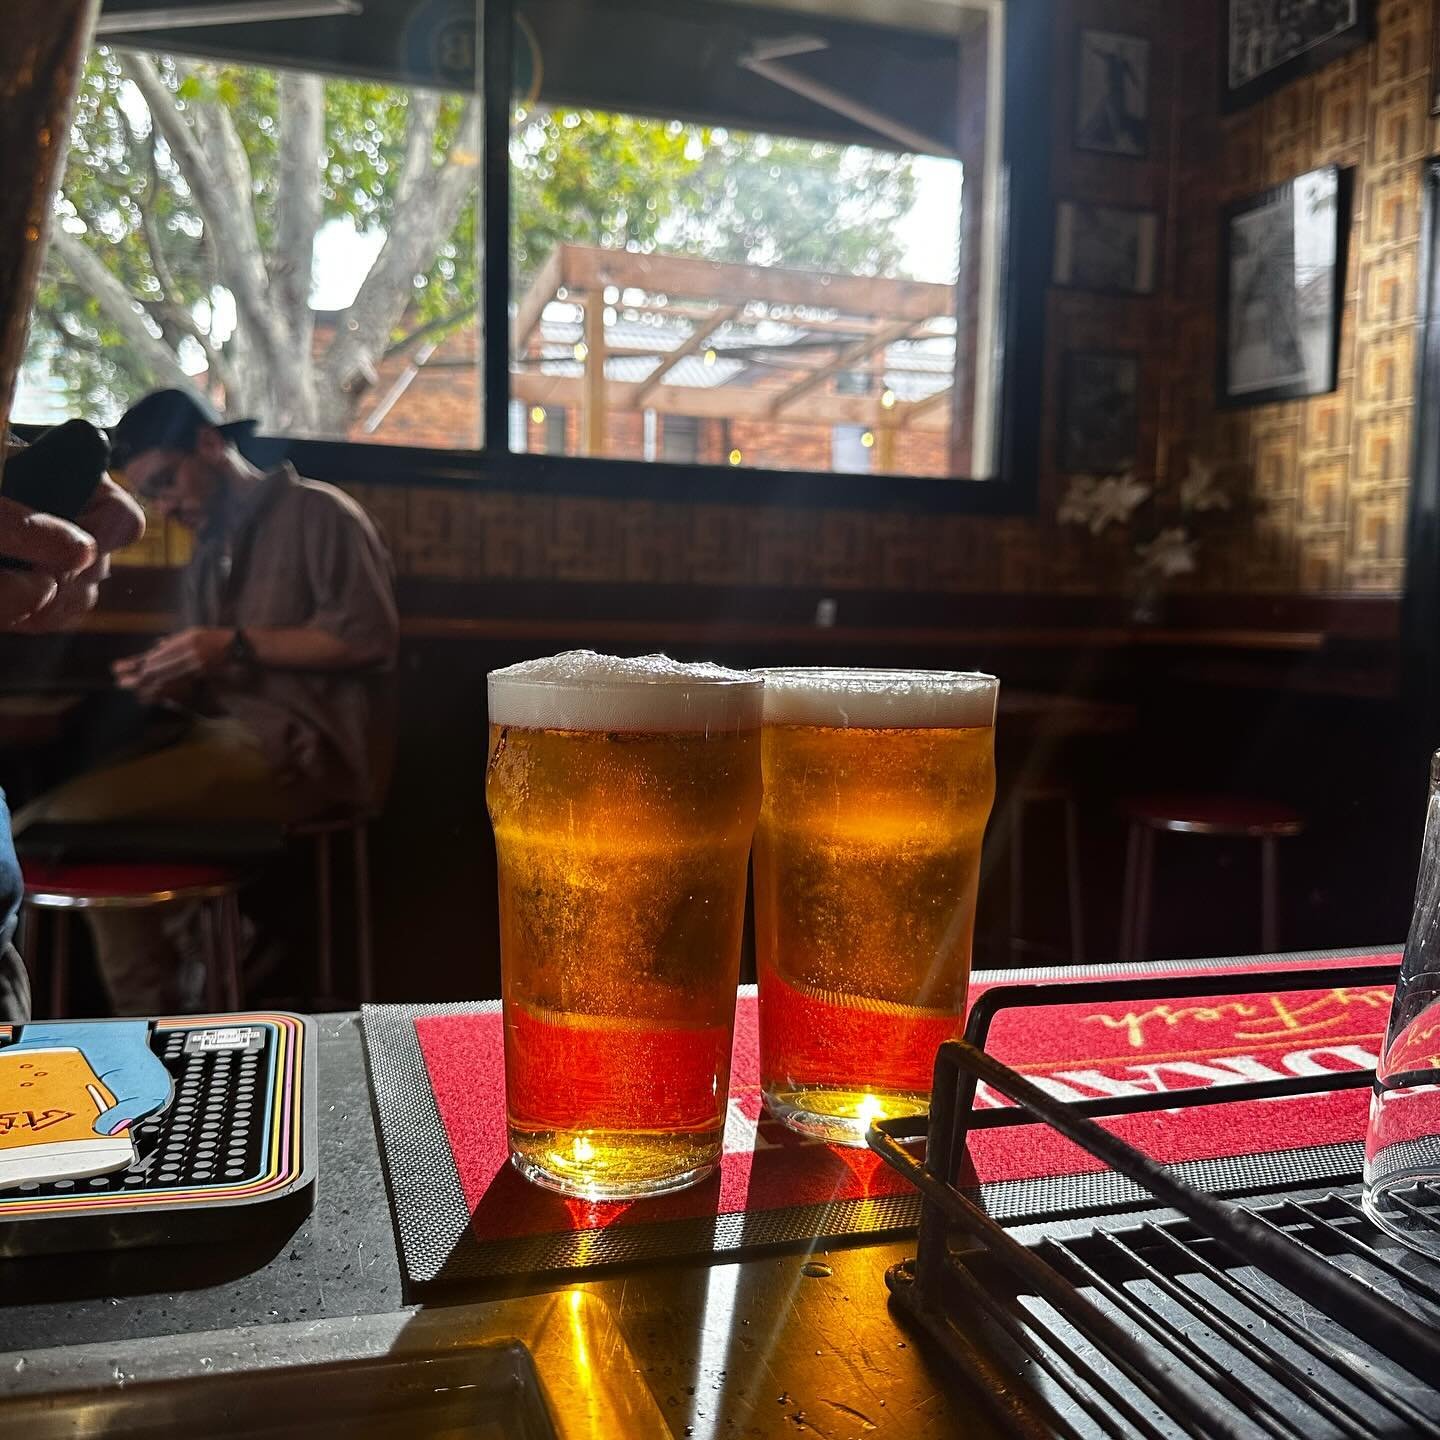 Sip happens! Come decompress with us from last nights antics this fine Sunday ☀️ 

// $20 jugs of stomping ground all day!

.
.
.
.
.
.
.
.
.
.
.

#Fitzroy #Pub #Sunday